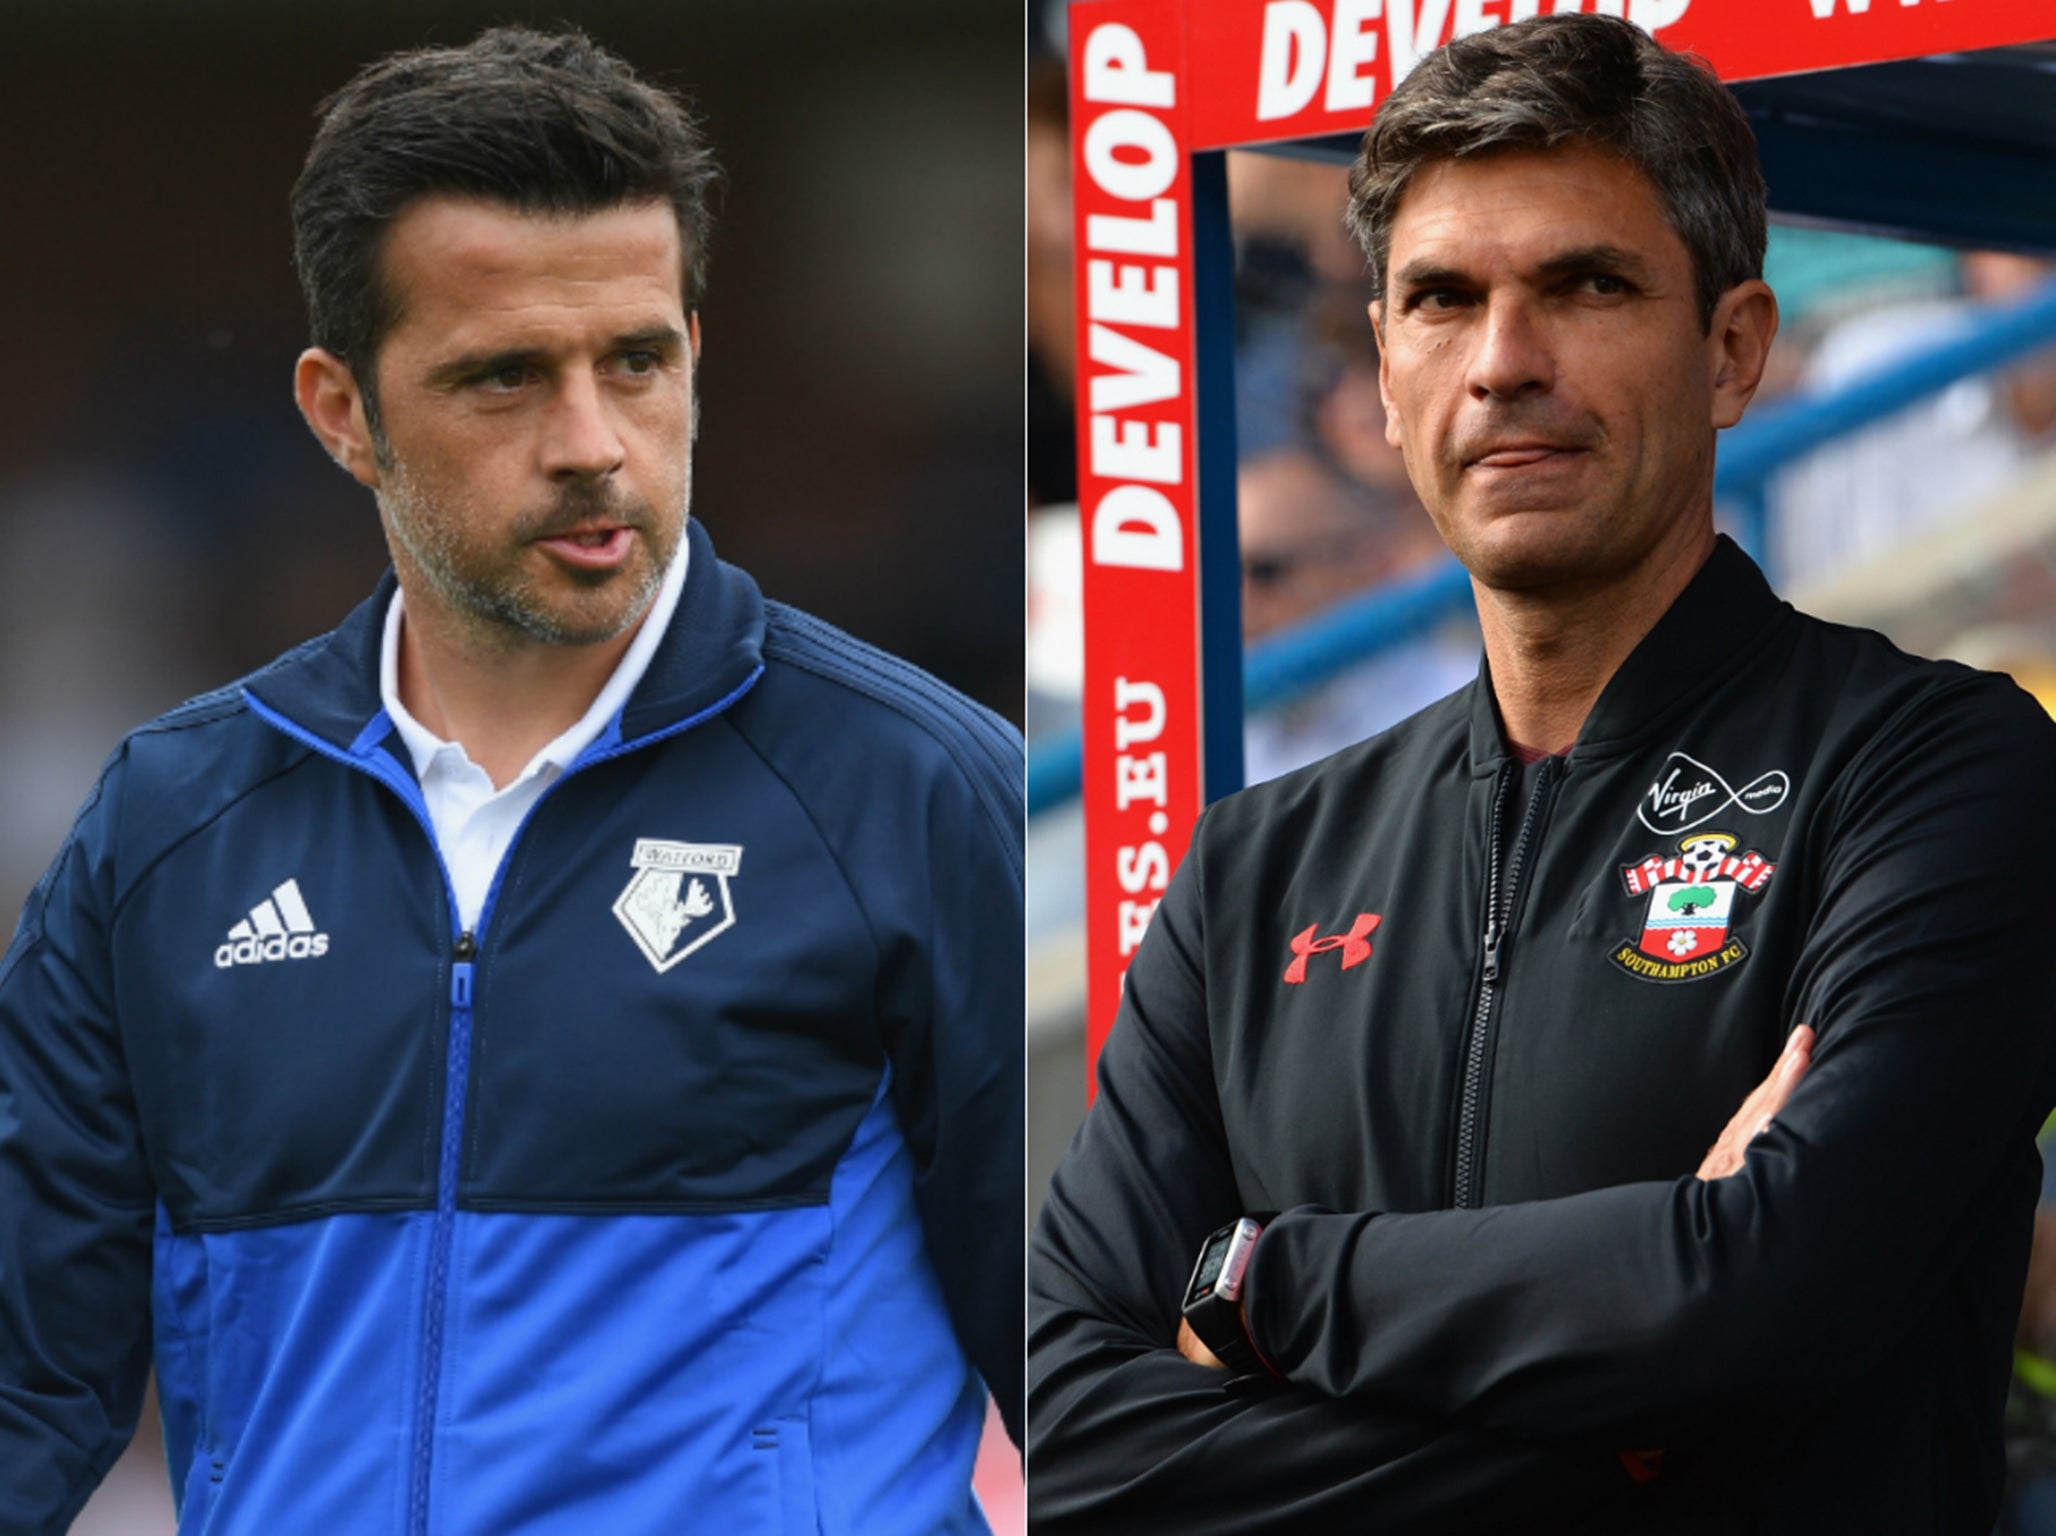 Watford and Southampton are both level on five points from their first three games